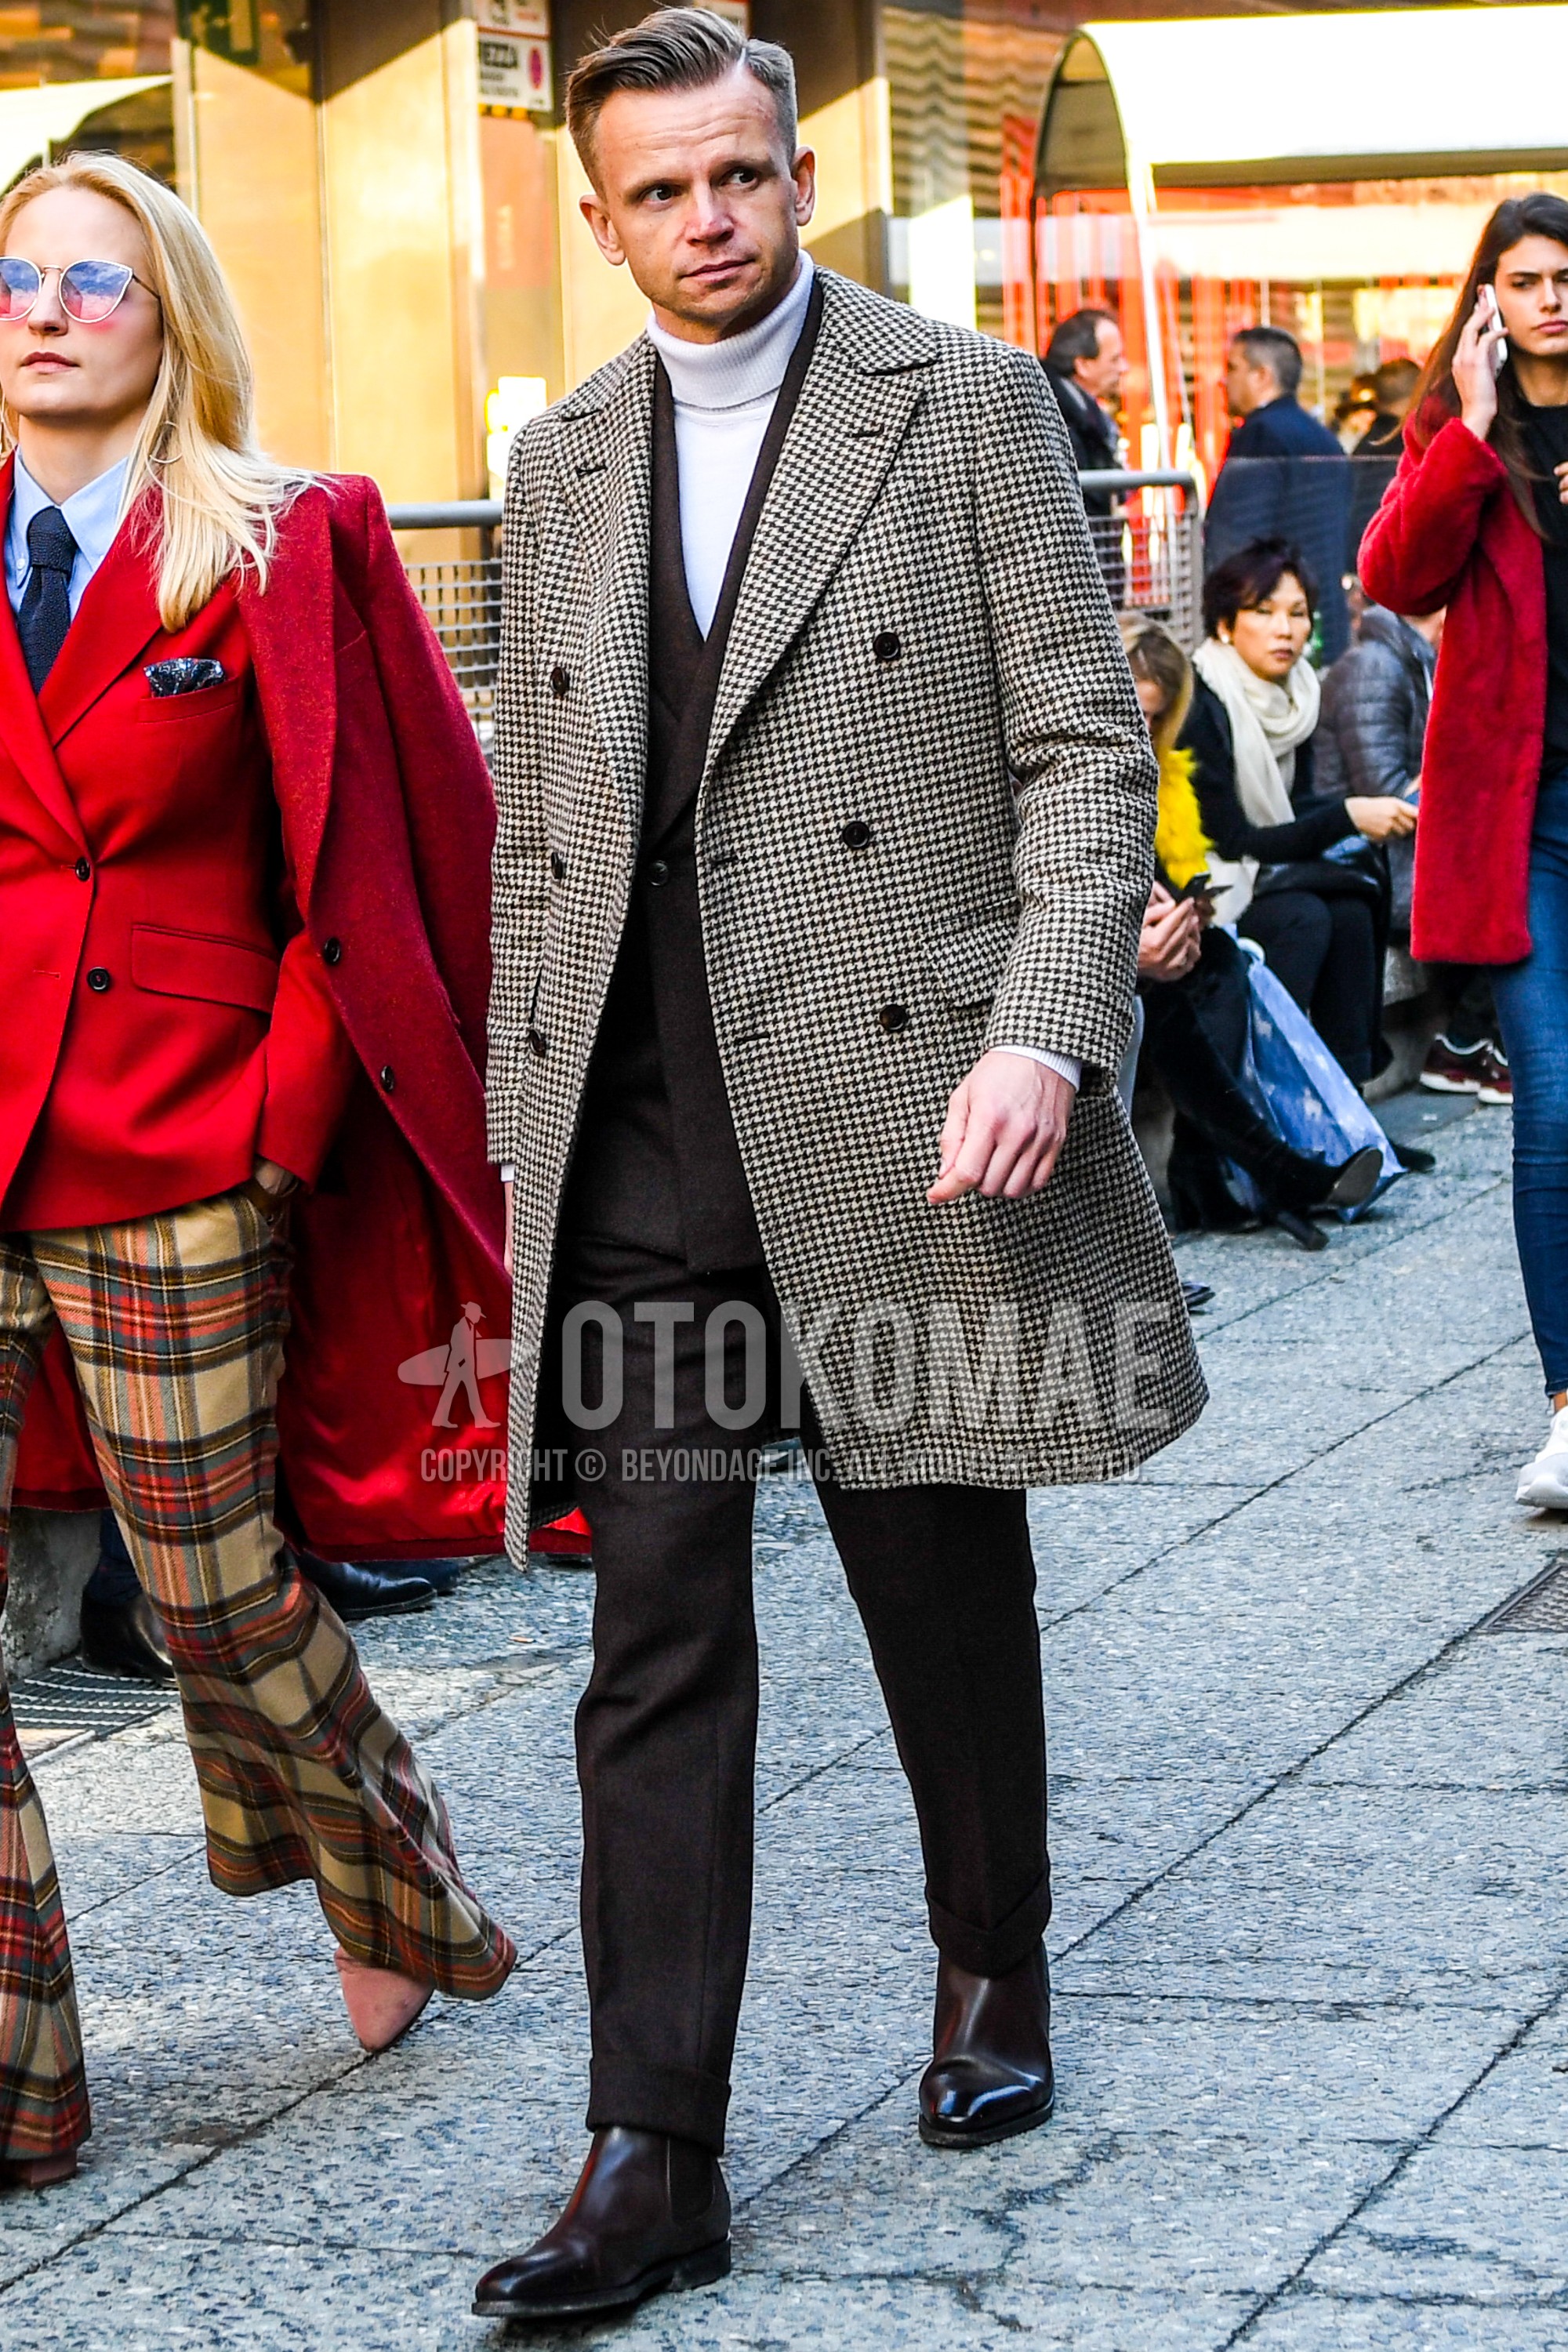 Men's autumn winter outfit with beige brown check chester coat, white plain turtleneck knit, brown side-gore boots, brown plain suit.